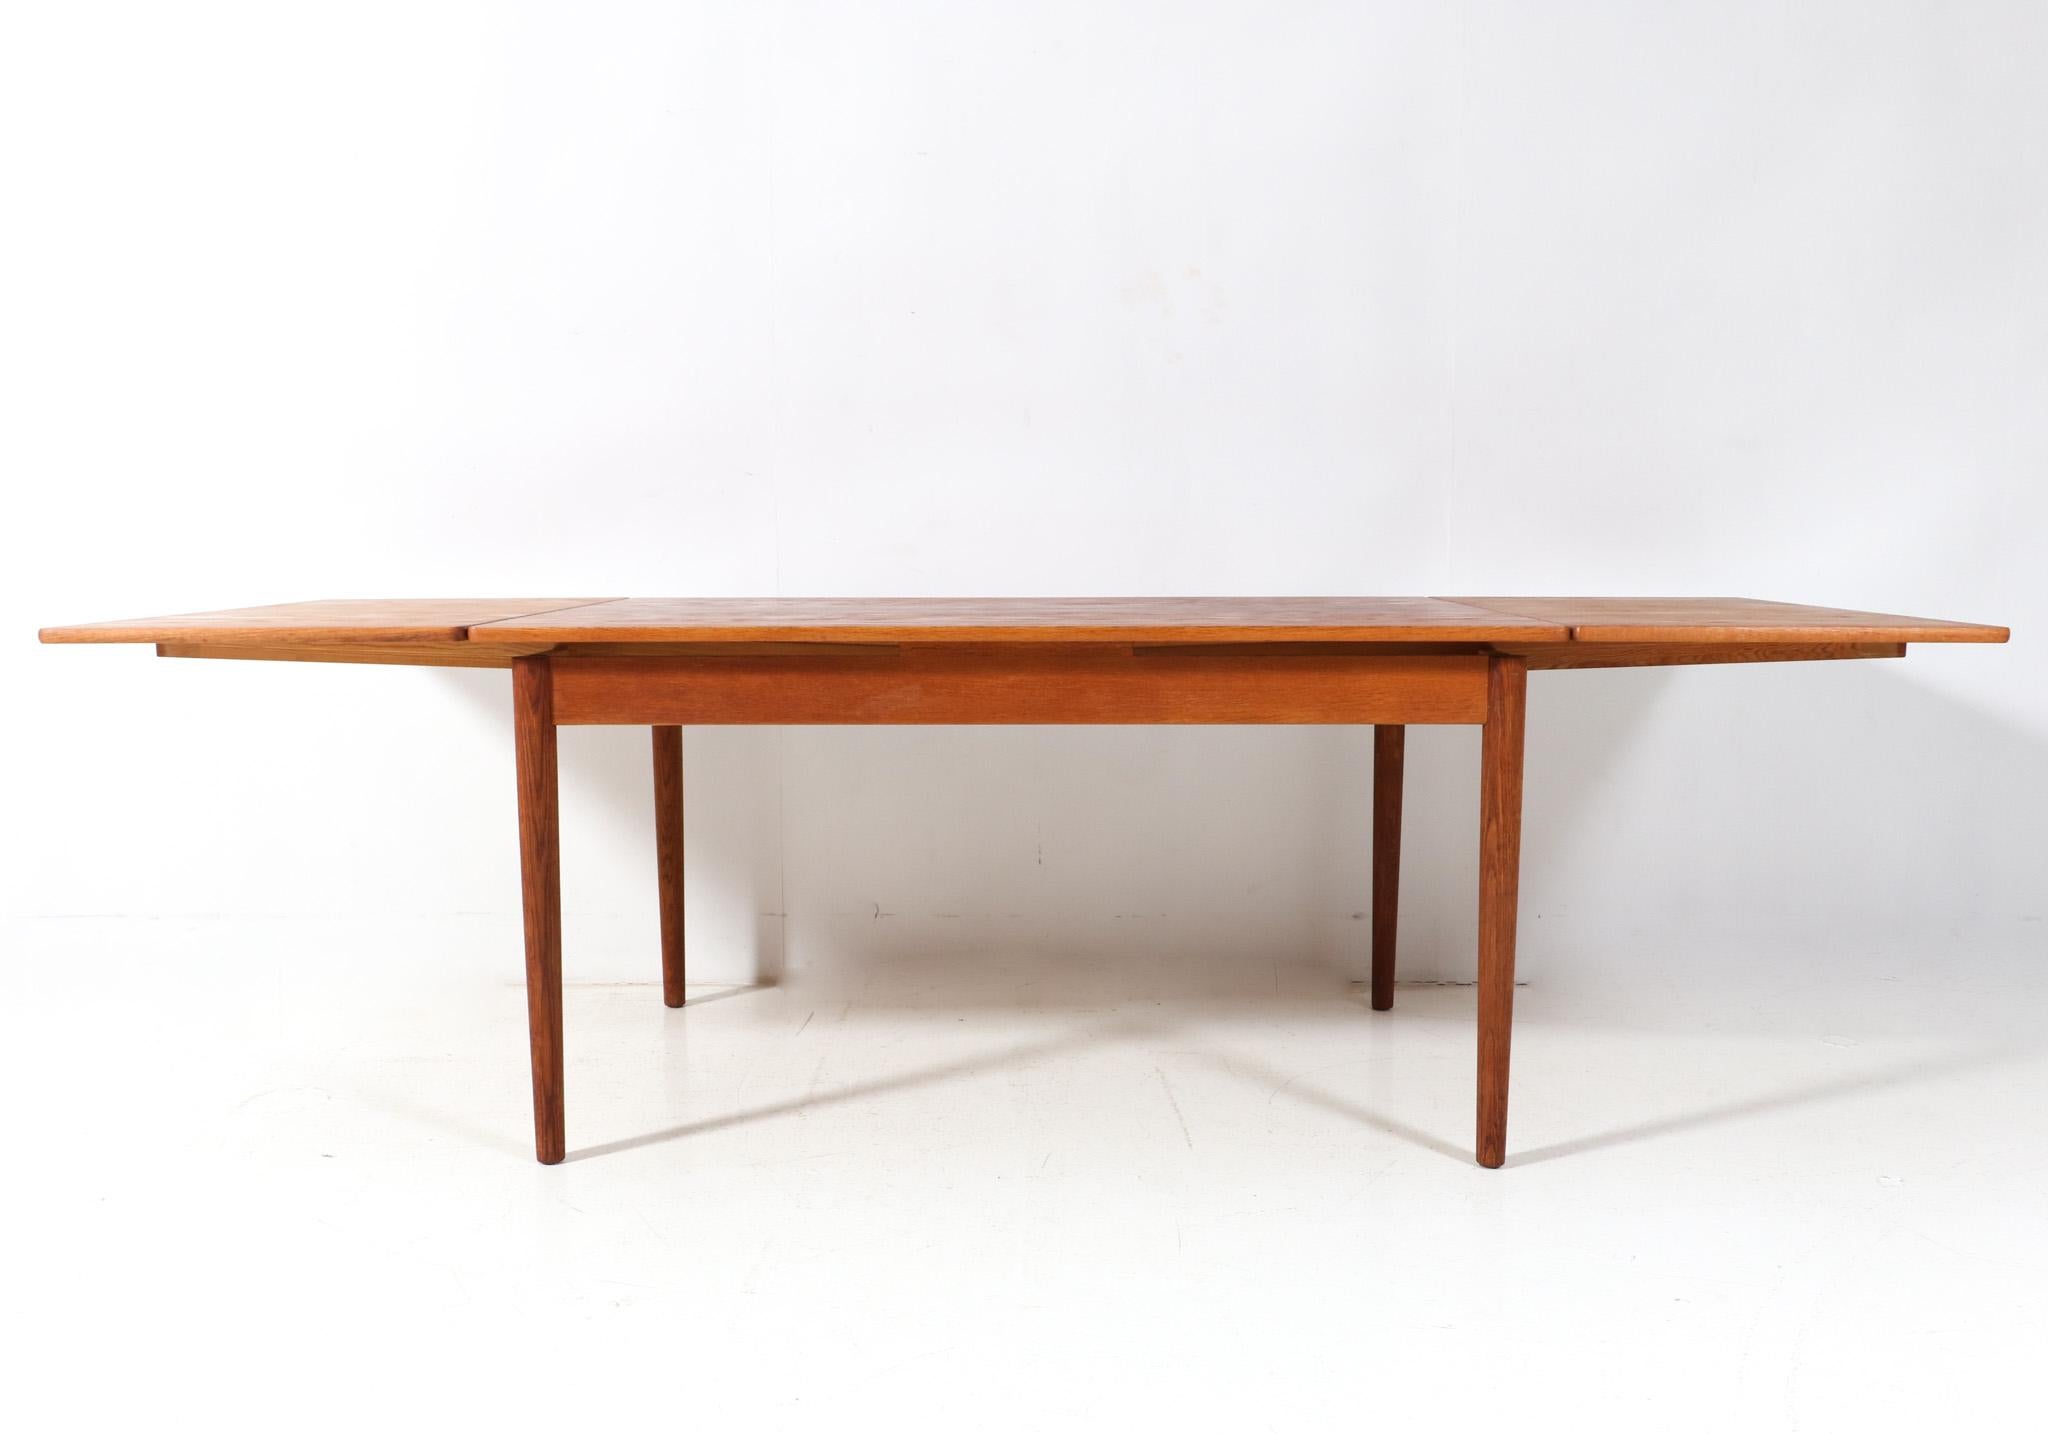  Mid-Century Modern Teak Extendable Dining Room Table Mo. 215 by Farstrup, 1960s For Sale 1